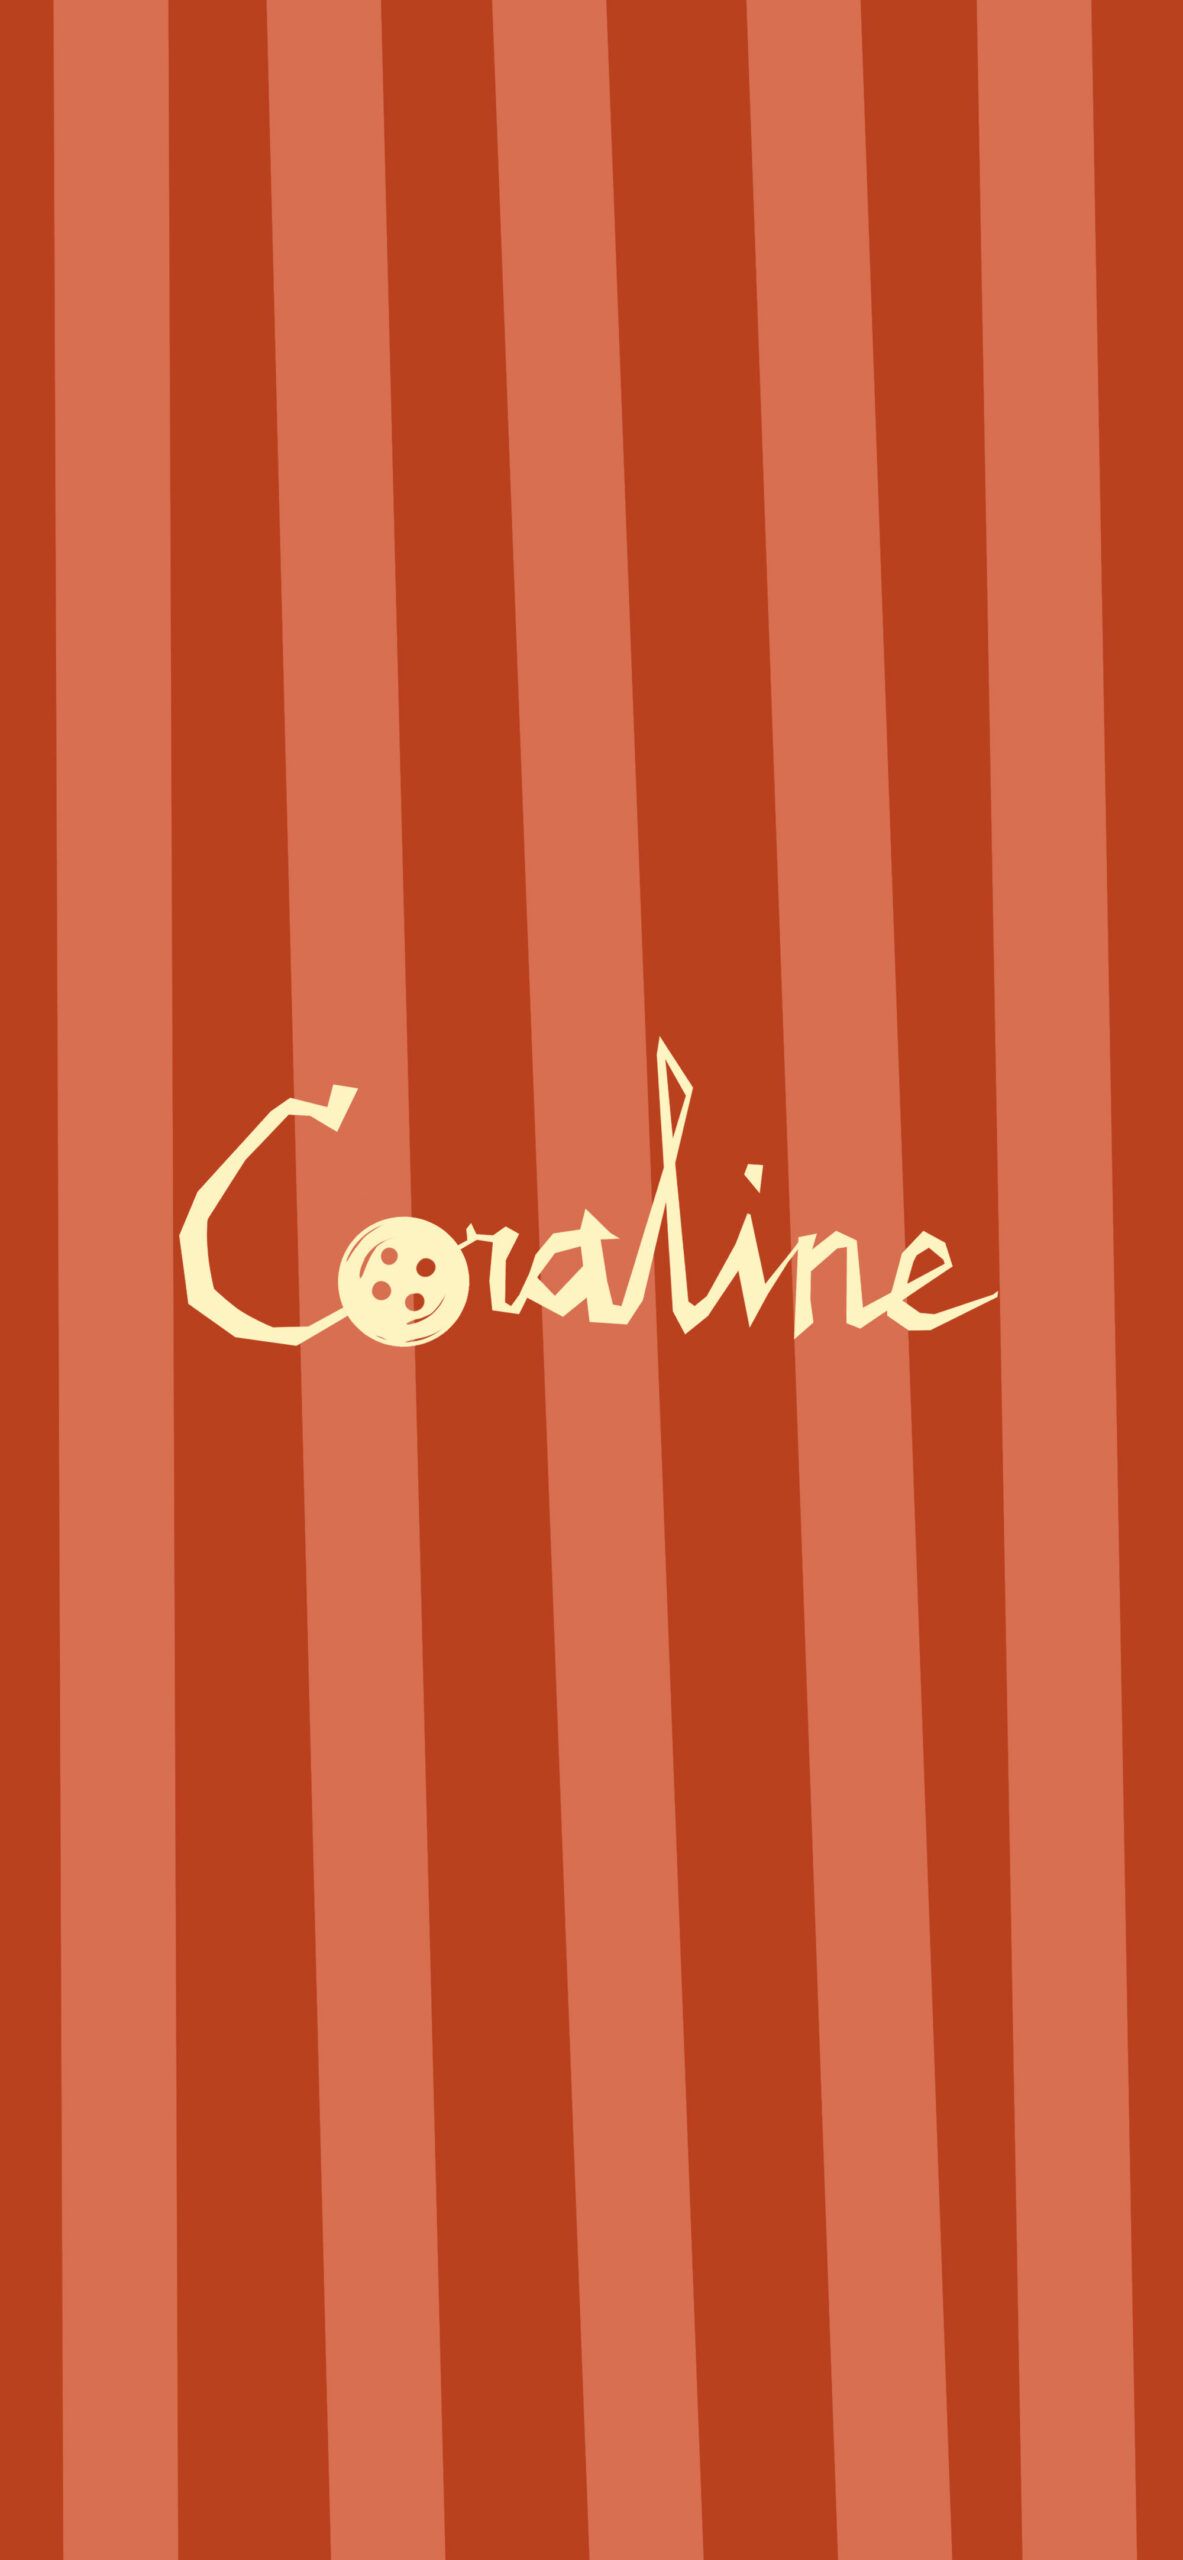 Coraline Phone Wallpaper by Capi12345 on DeviantArt - IPhone red